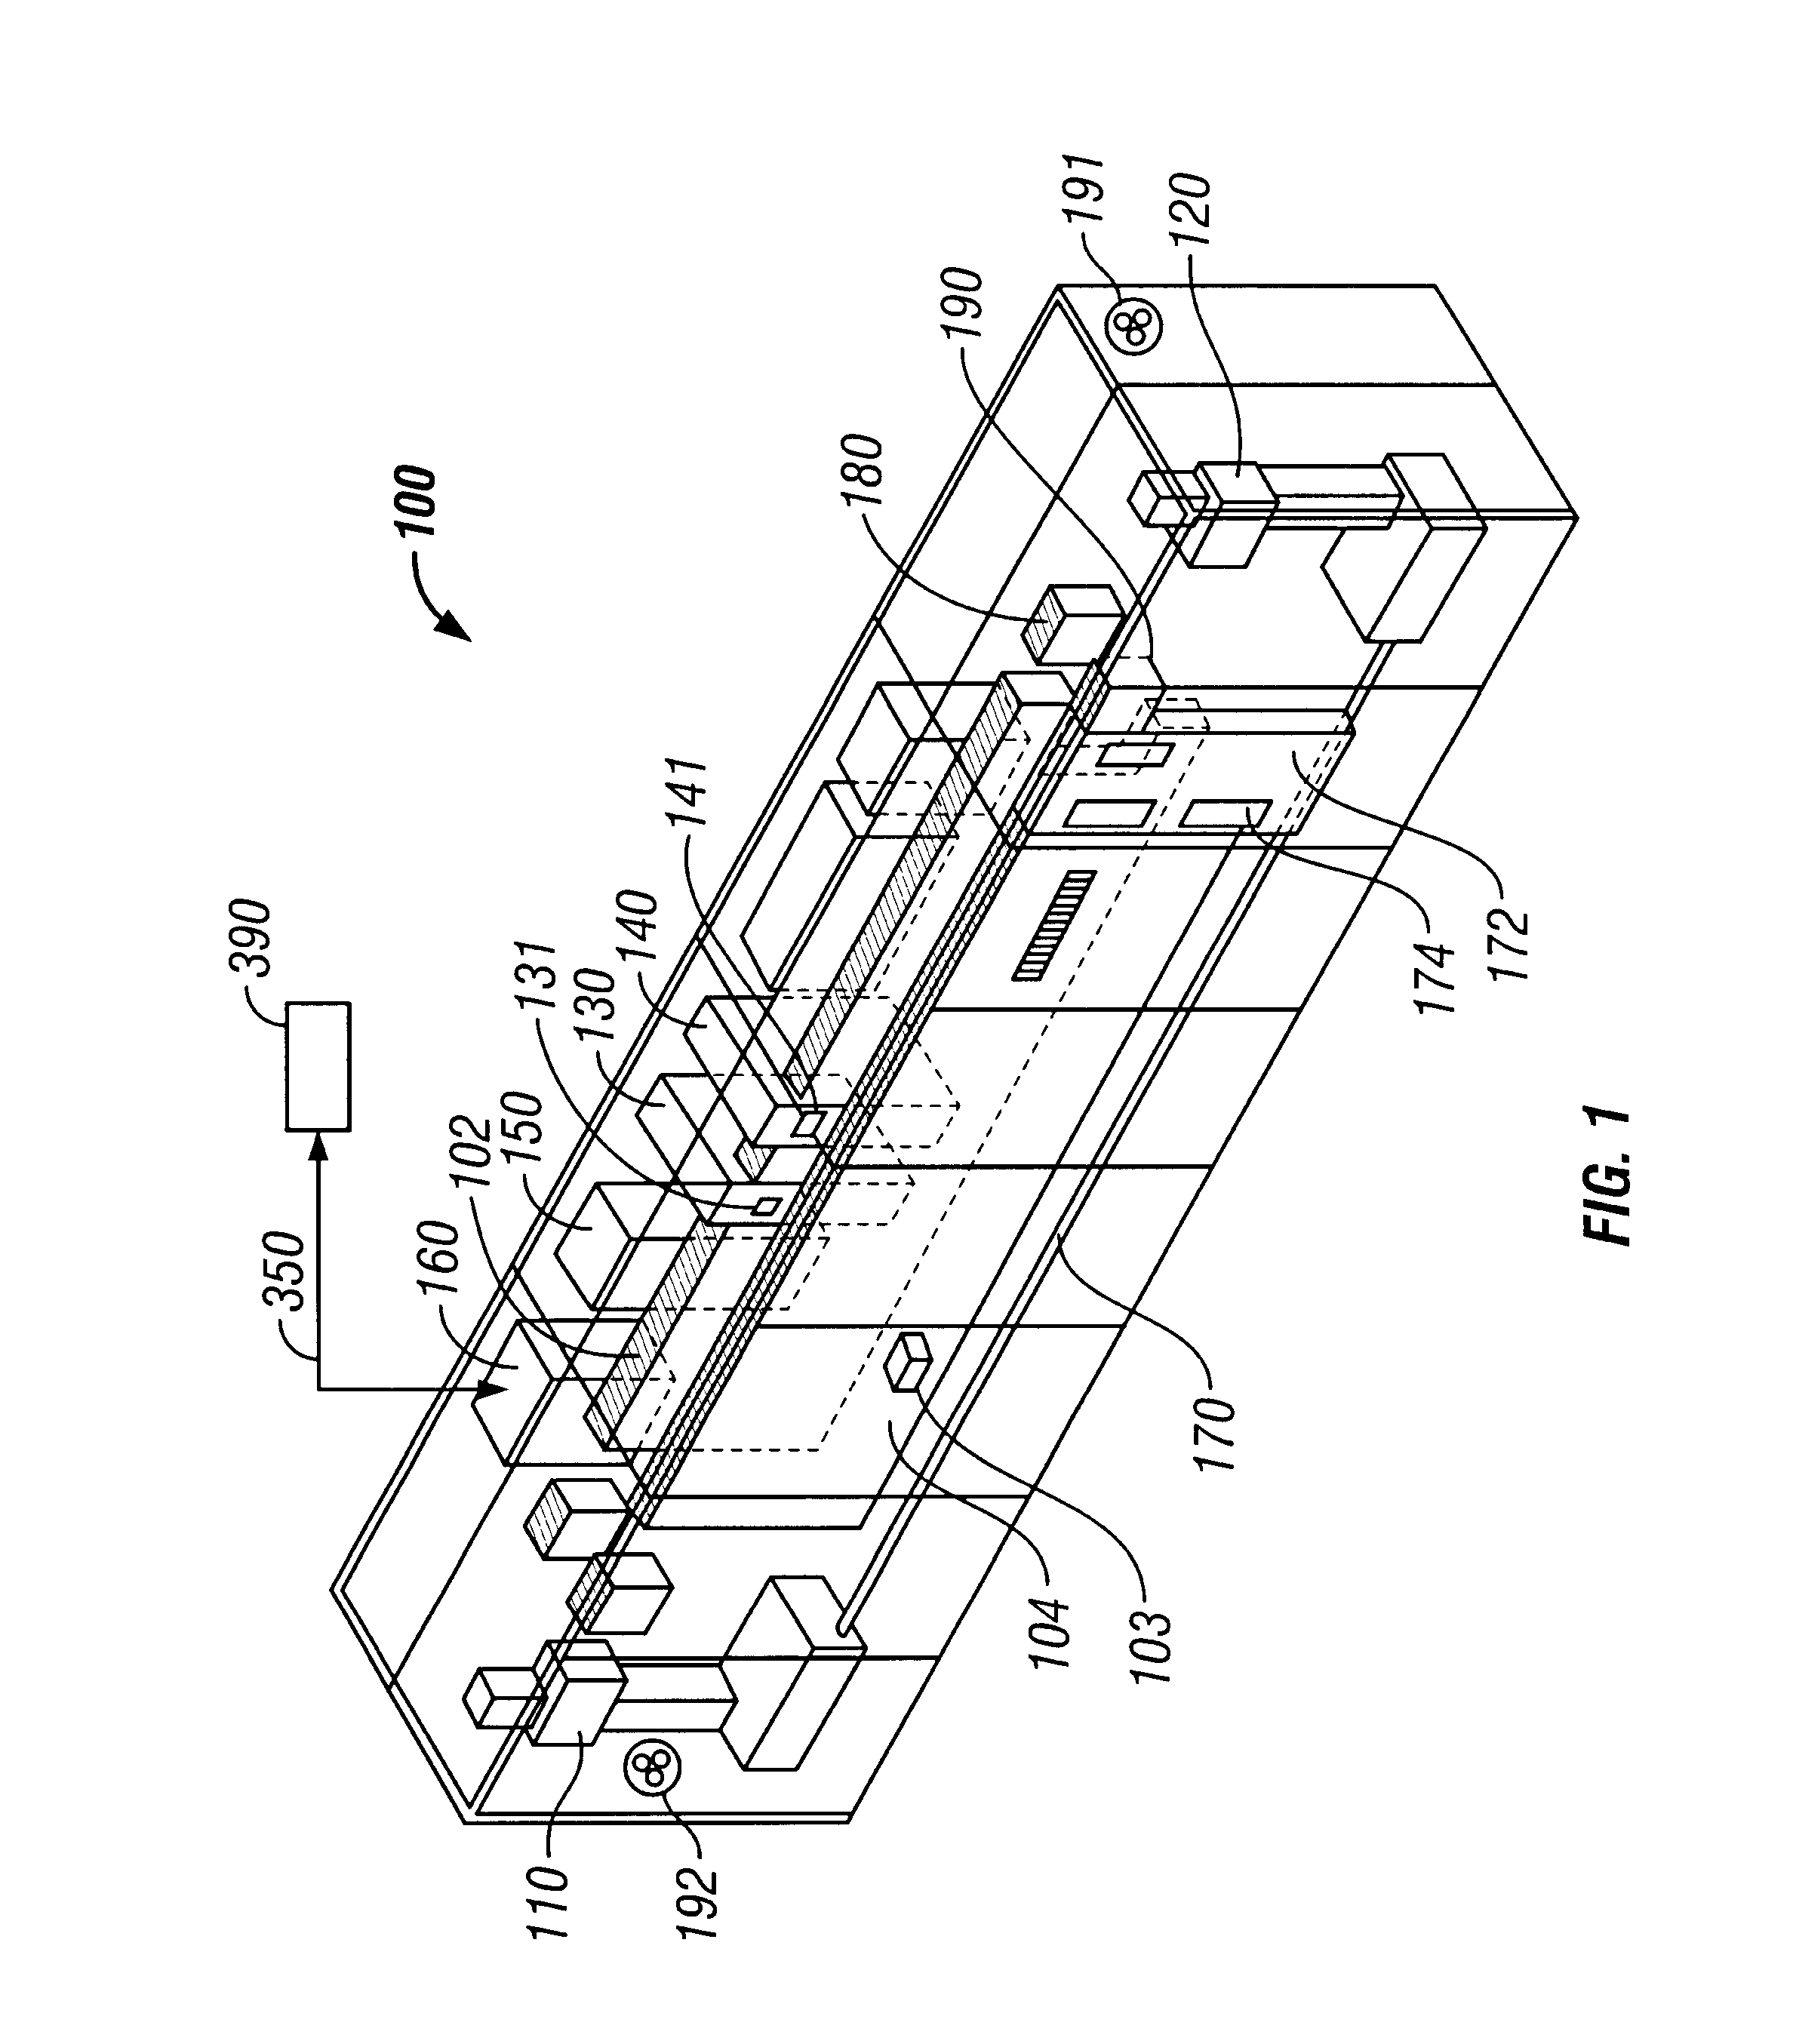 System and method for autonomic environmental monitoring, adjusting, and reporting capability in a remote data storage and retrieval device